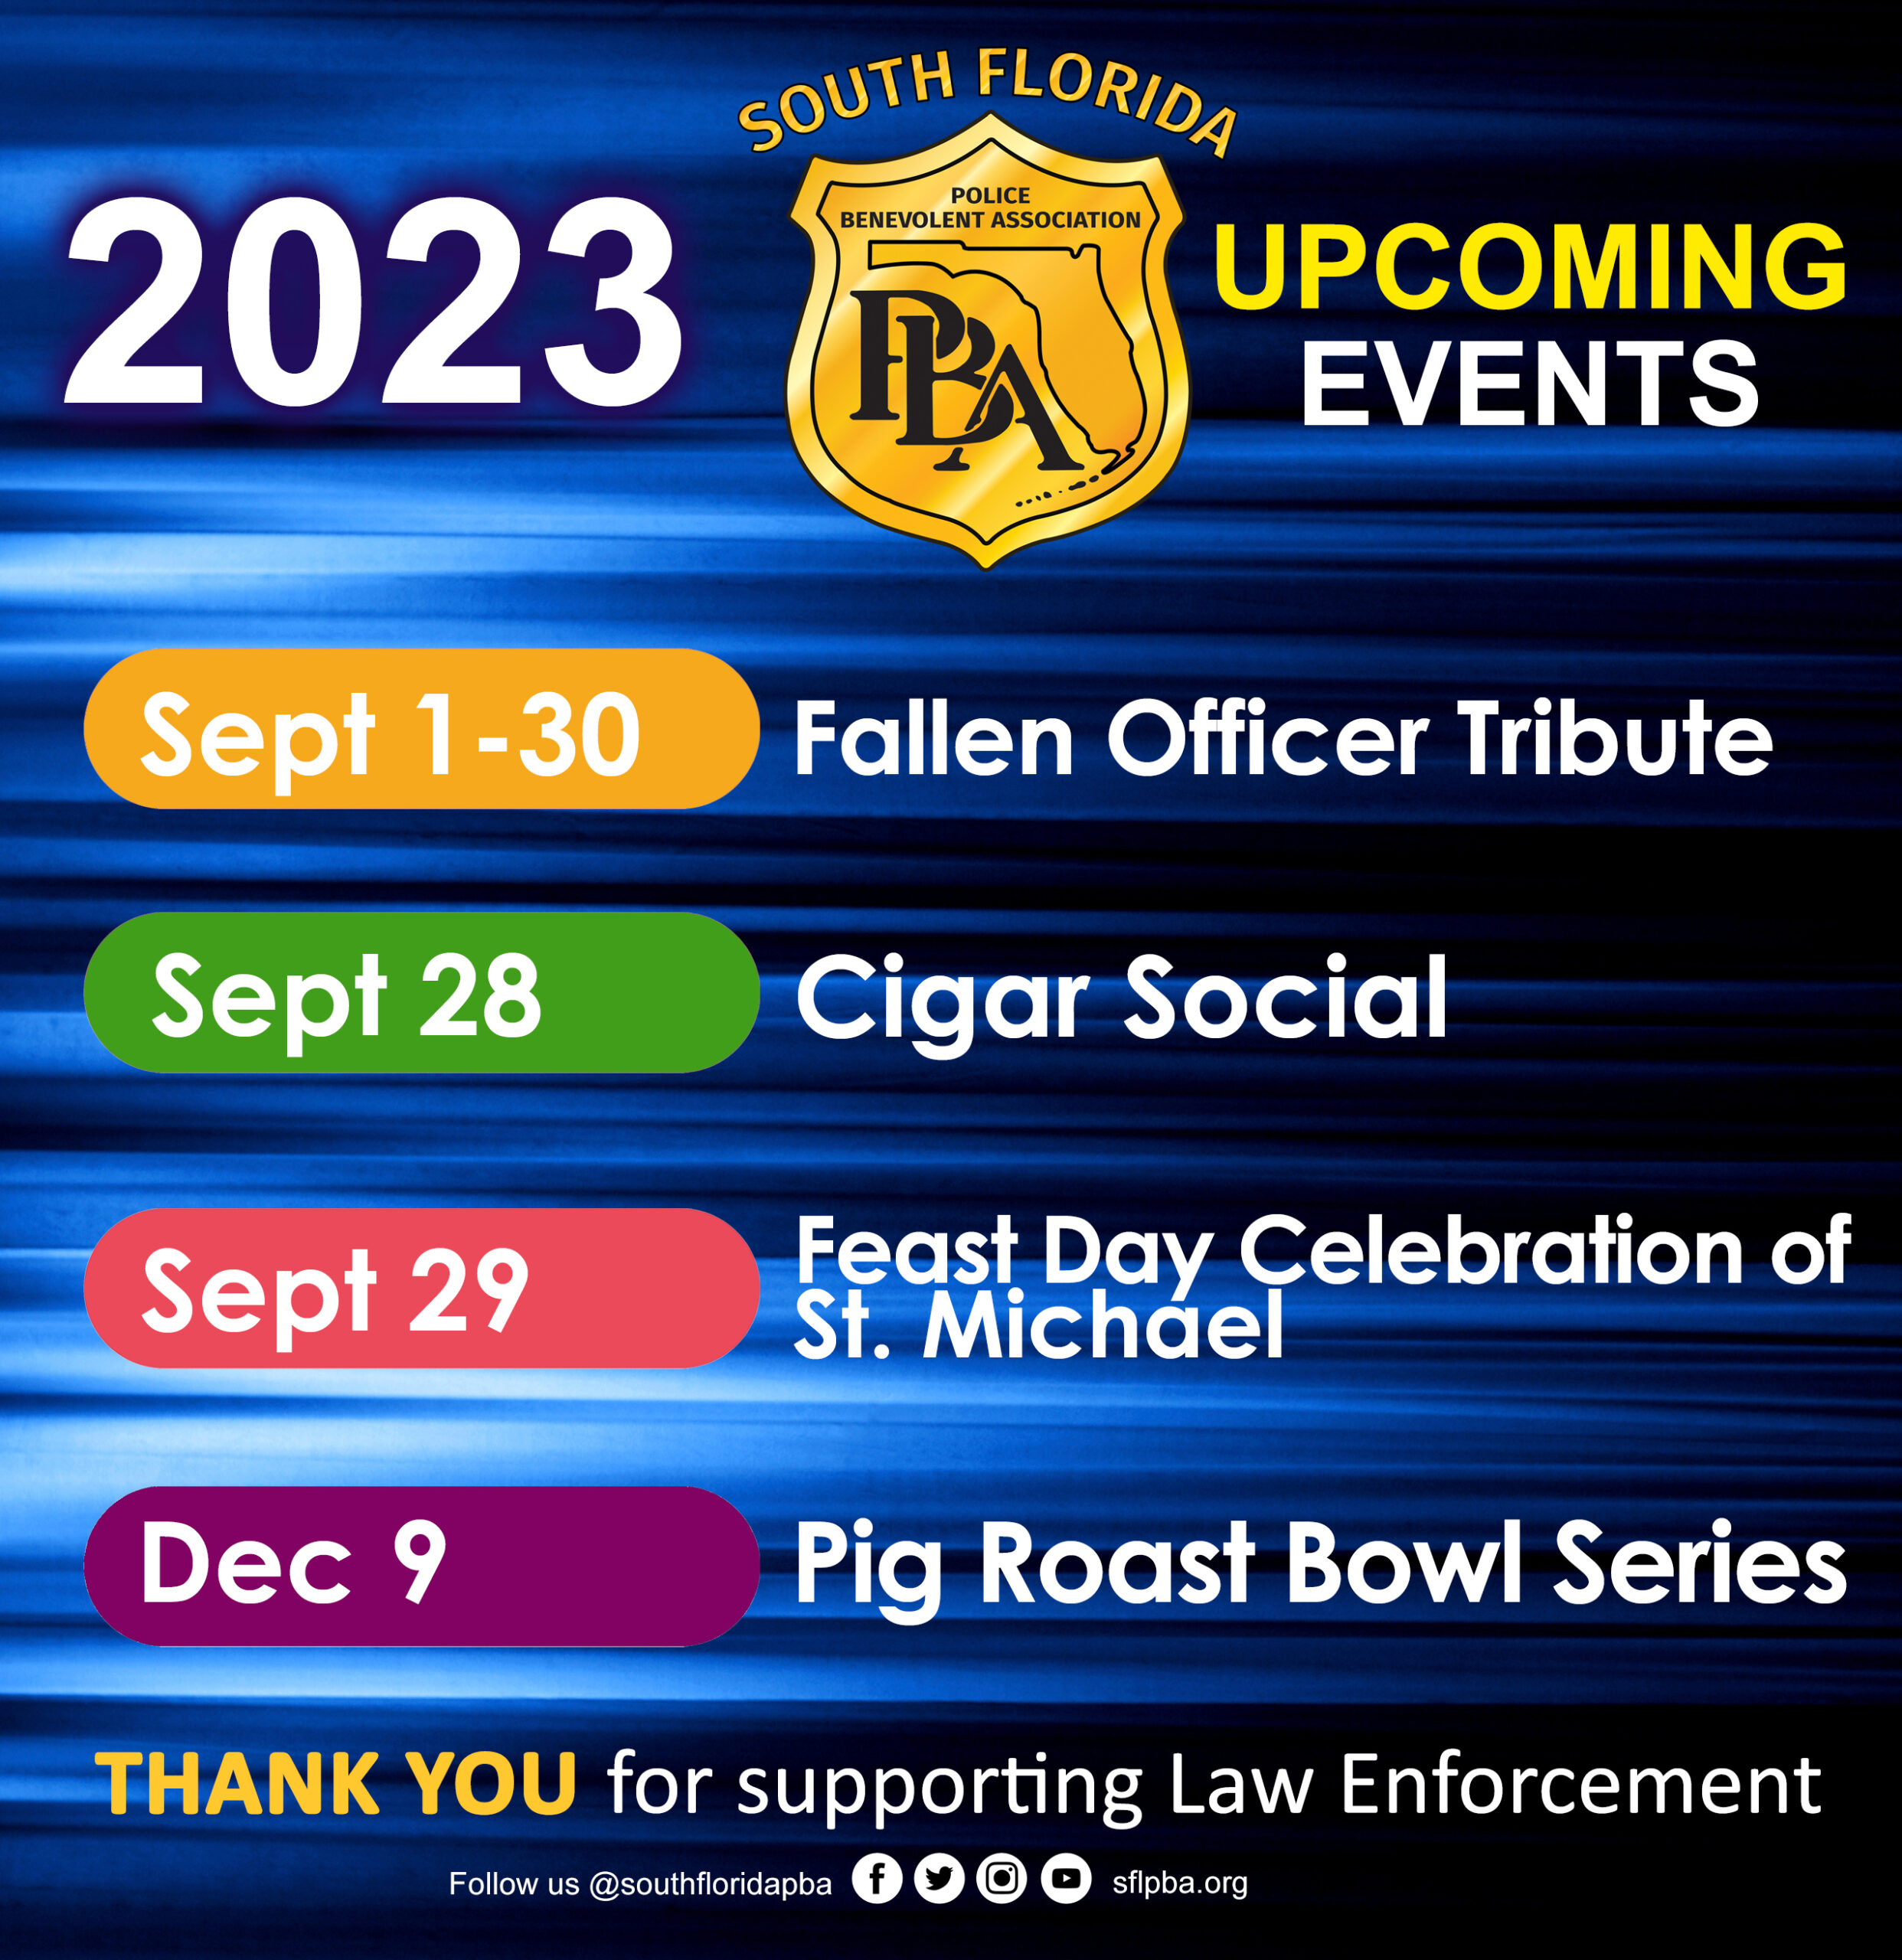 //dcpba.org/wp-content/uploads/2023/07/August-2023-Events-Flyer-scaled.jpg